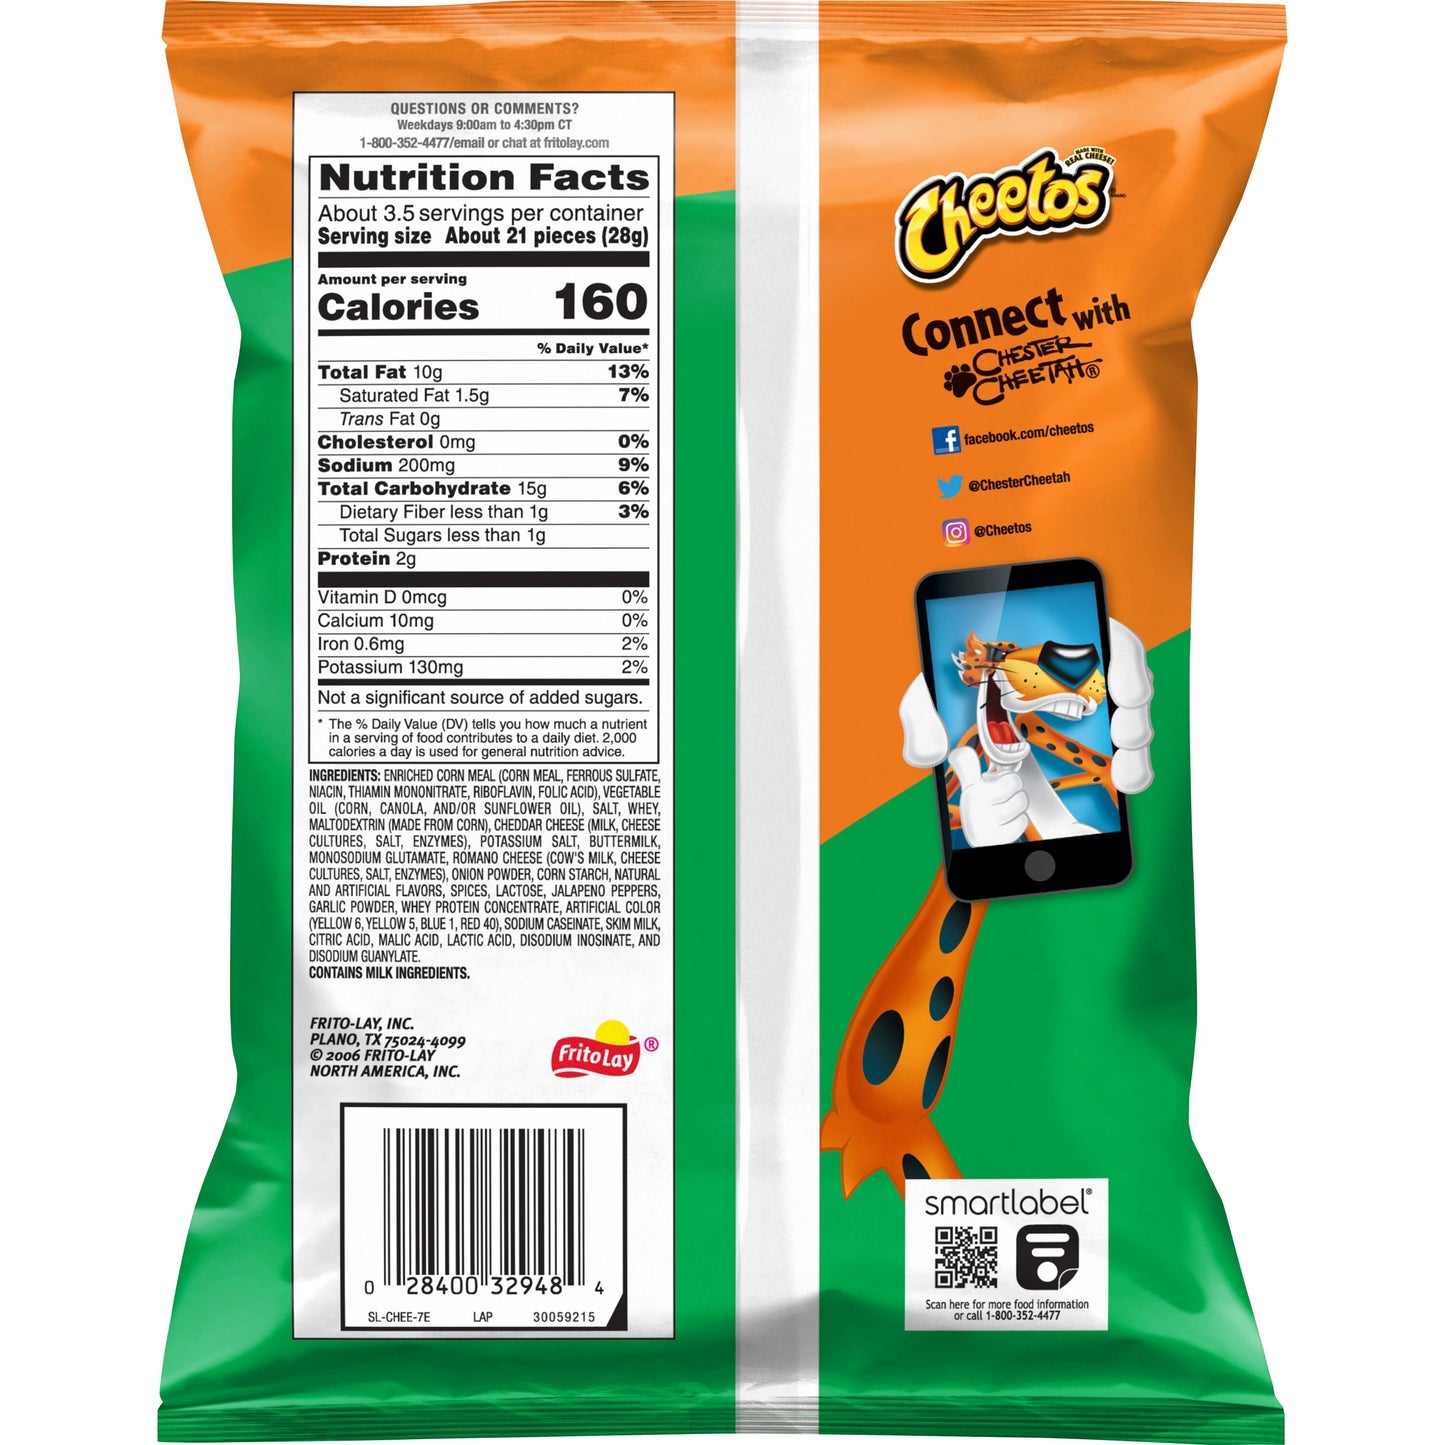 Crunchy Cheese Cheddar Jalapeno Flavored Snack Chips, 3.25 Oz Bag